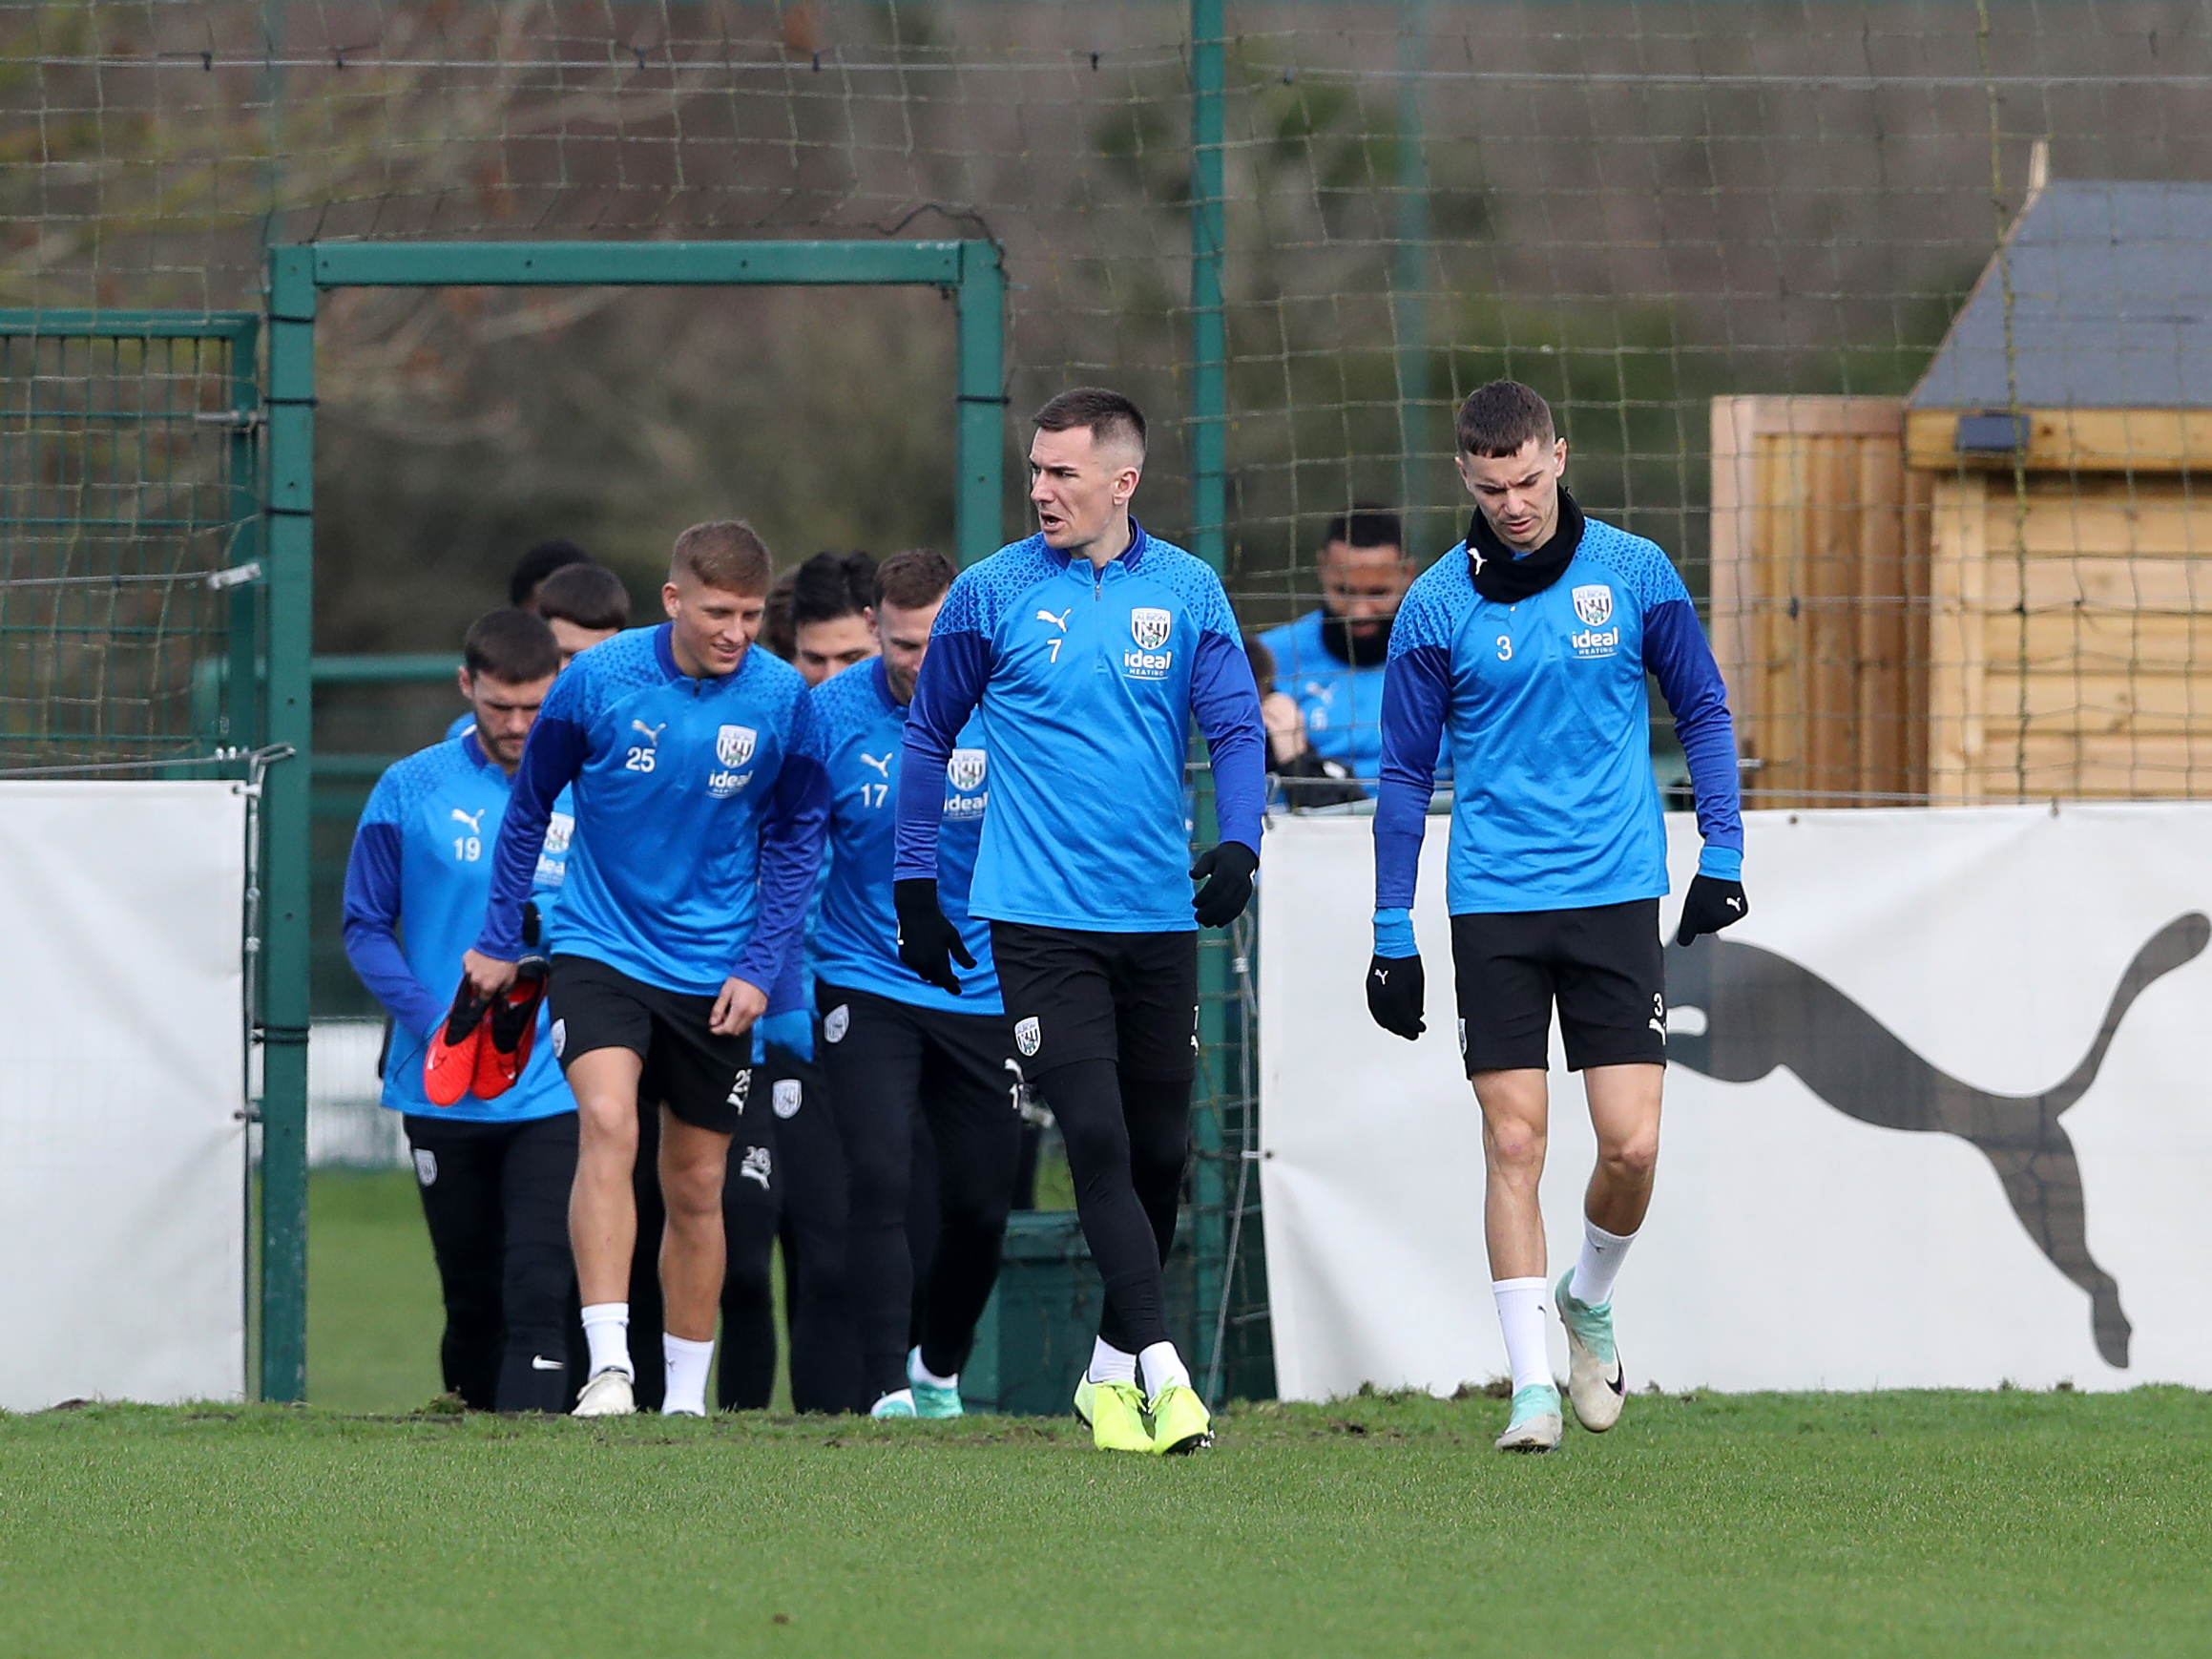 Albion players head out to warm up ahead of a training session, led by captain Jed Wallace